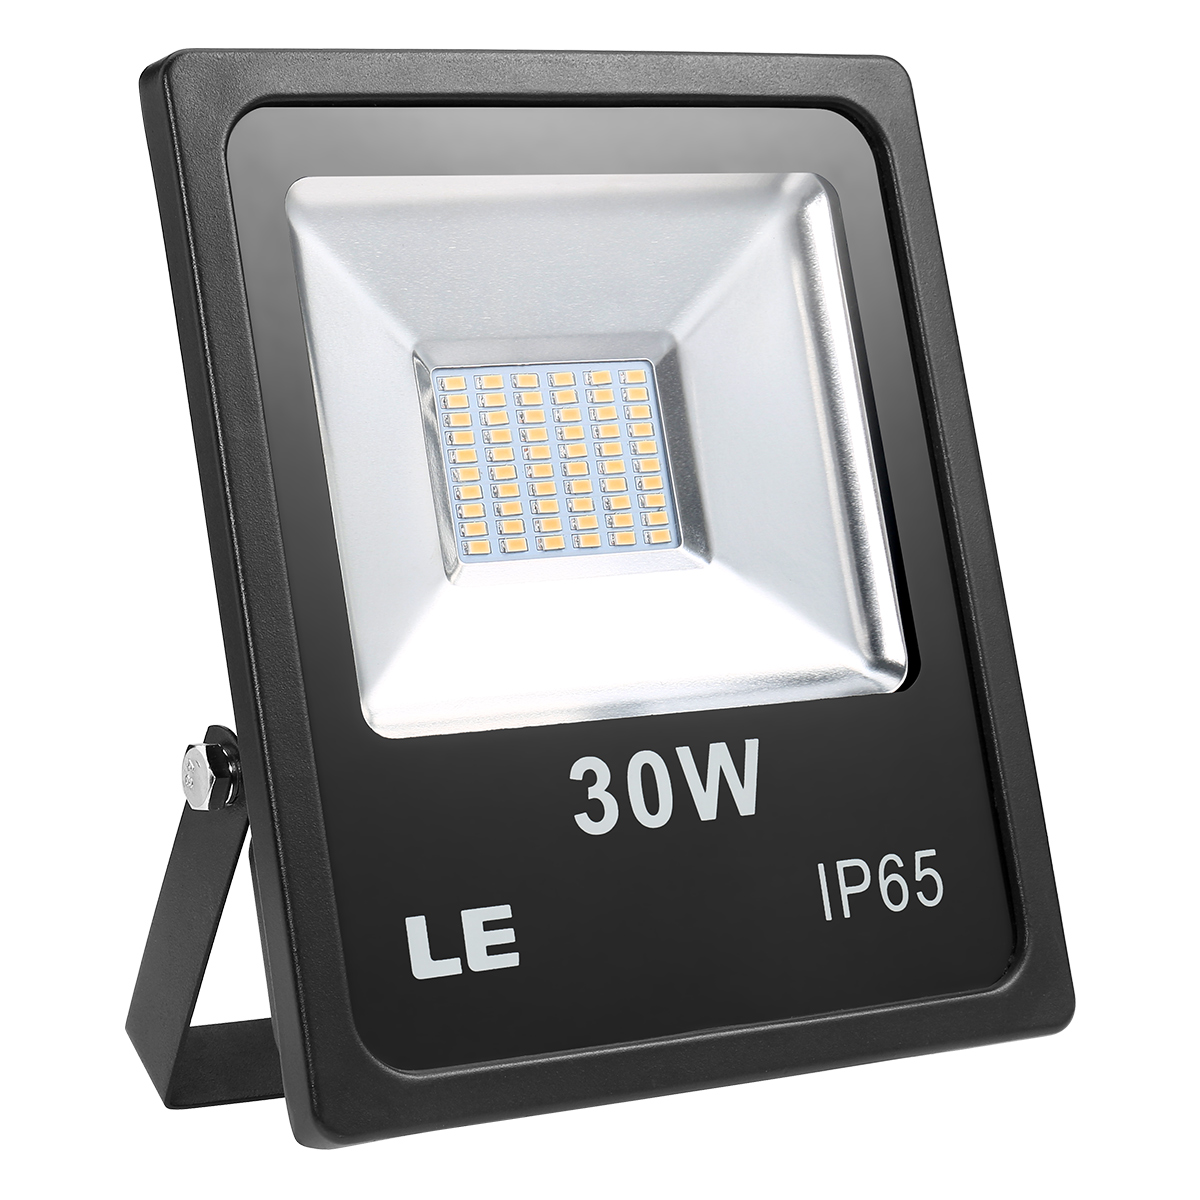 Details about   Lysed 2 Pack 30W LED Flood Light,2400LM 3000K Warm White Super Bright Security L 